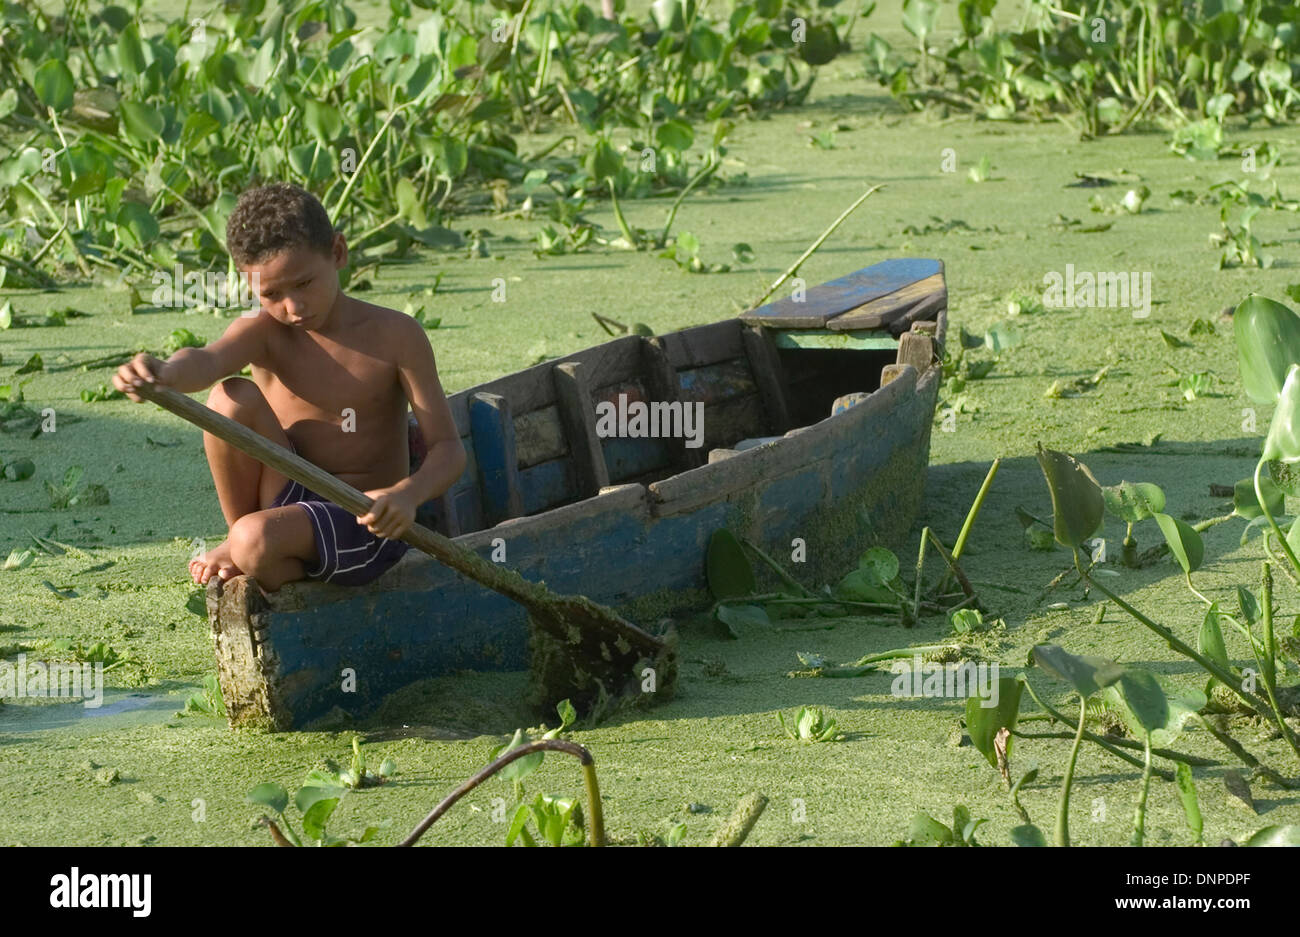 Portrait of a boy in Congo Mirador village as she rows a boat in waters covered with lemma plants,Maracaibo lake, Venezuela Stock Photo